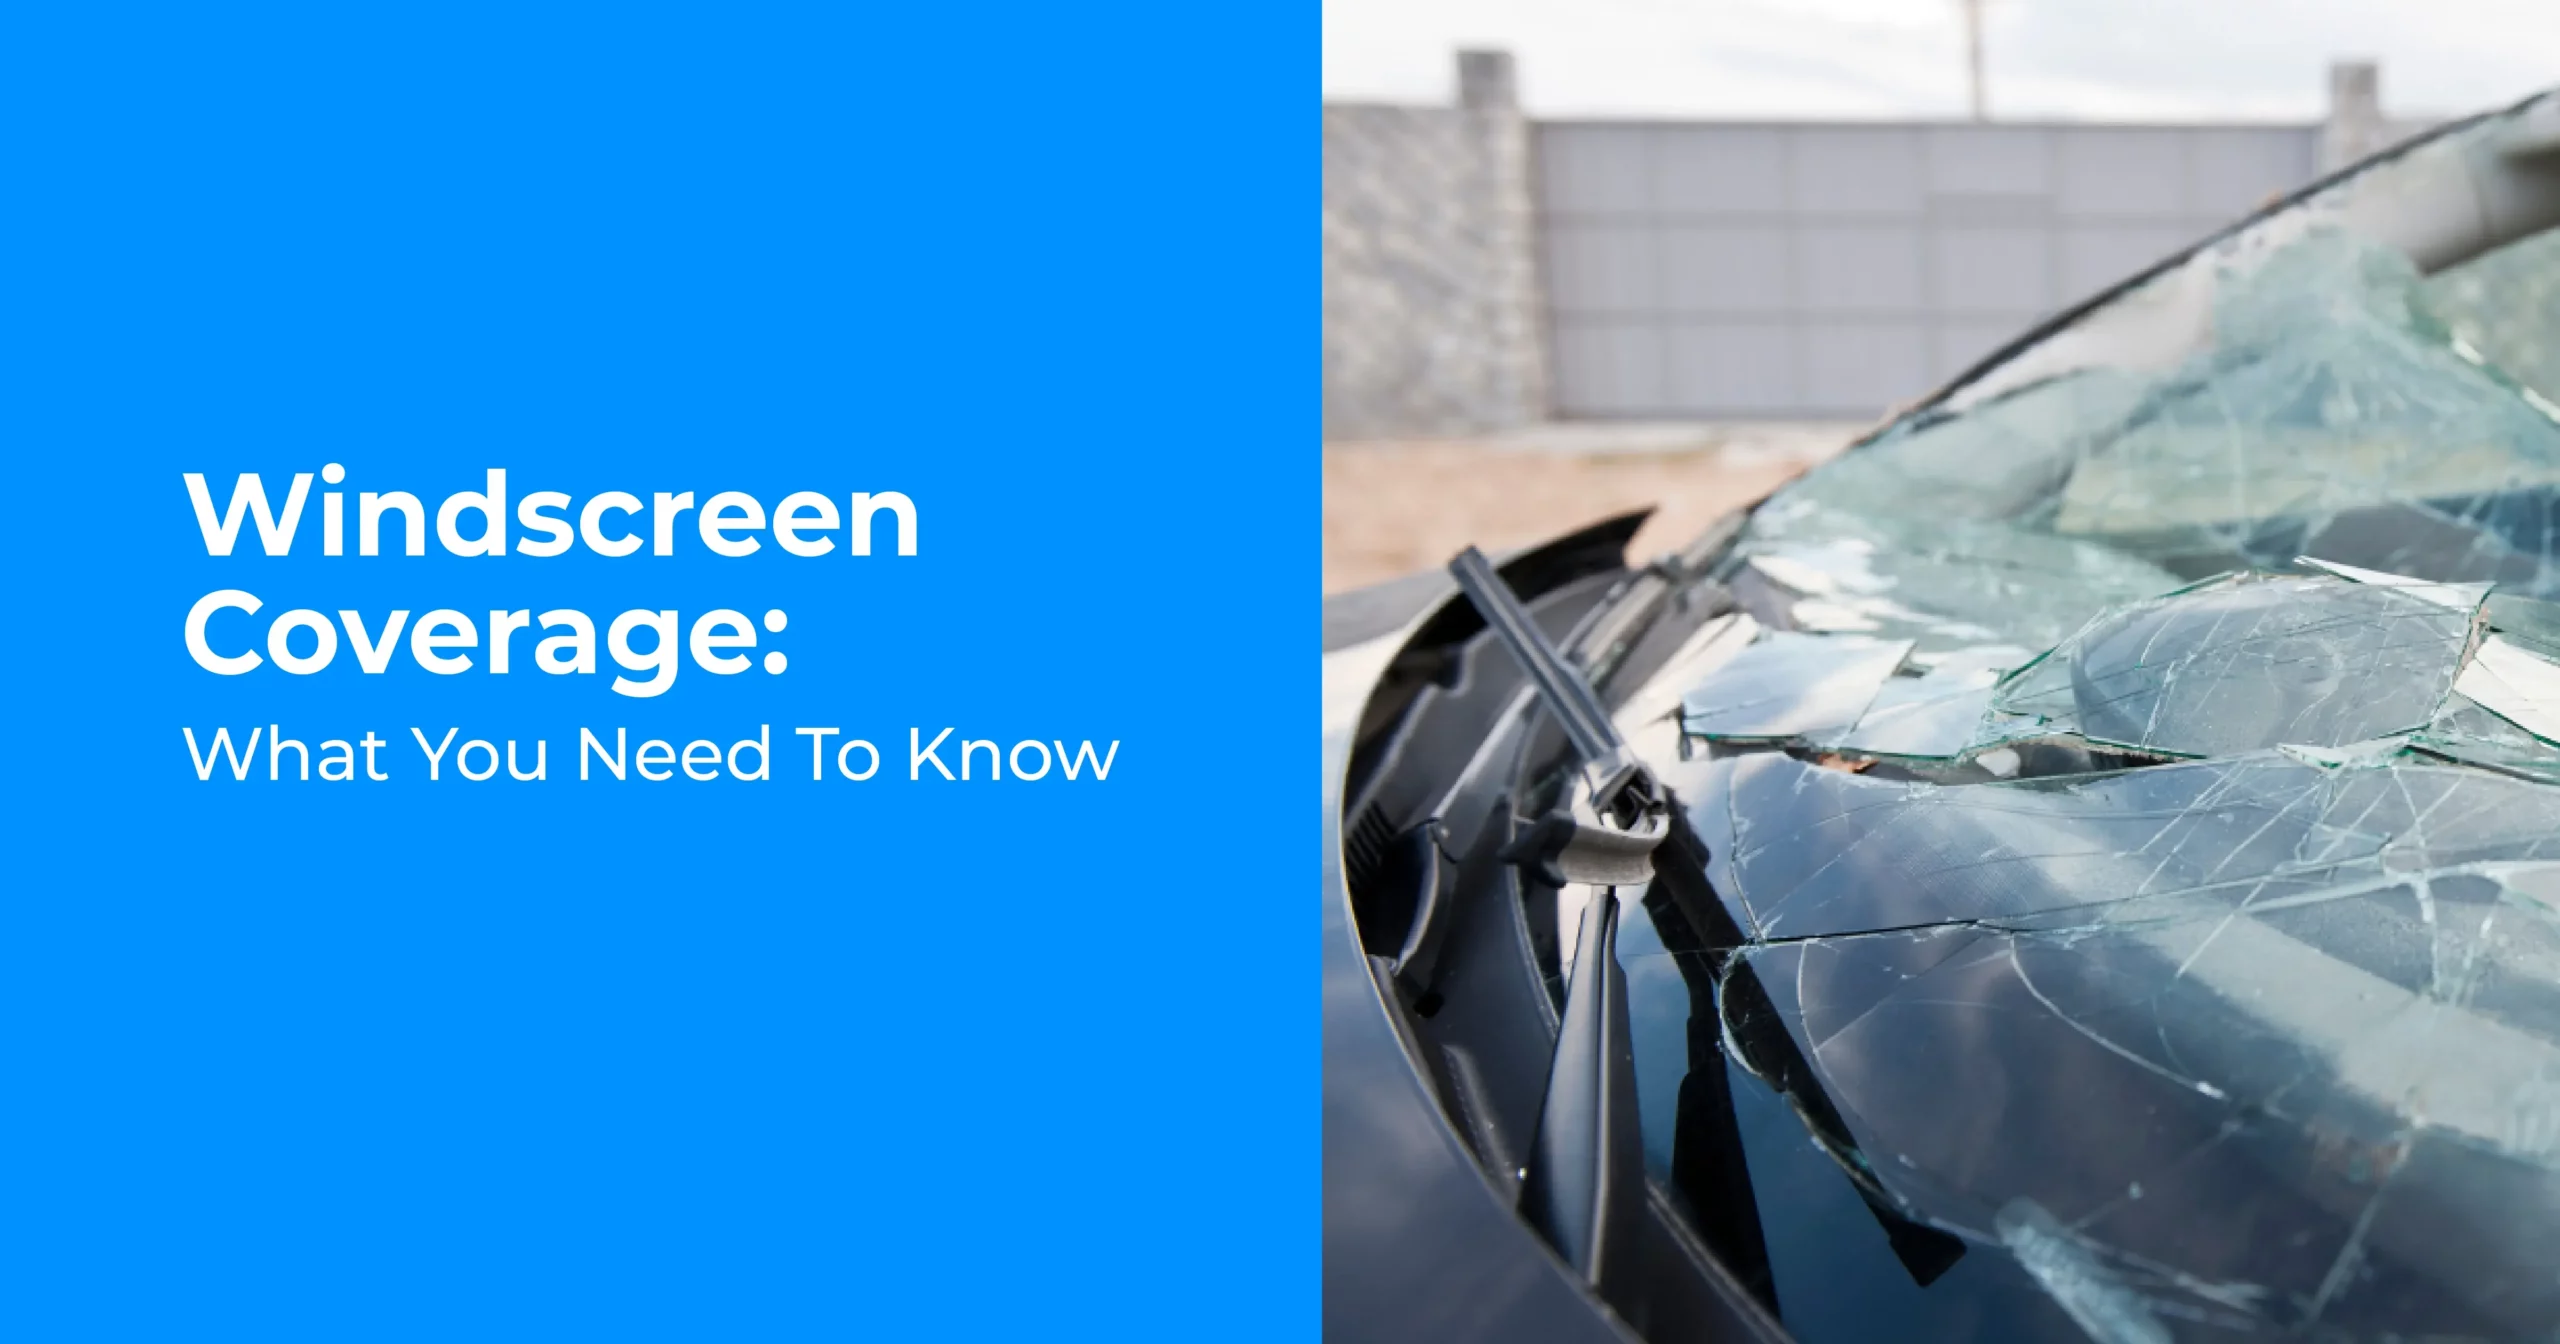 11Article on what you need to know about Windscreen Coverage.